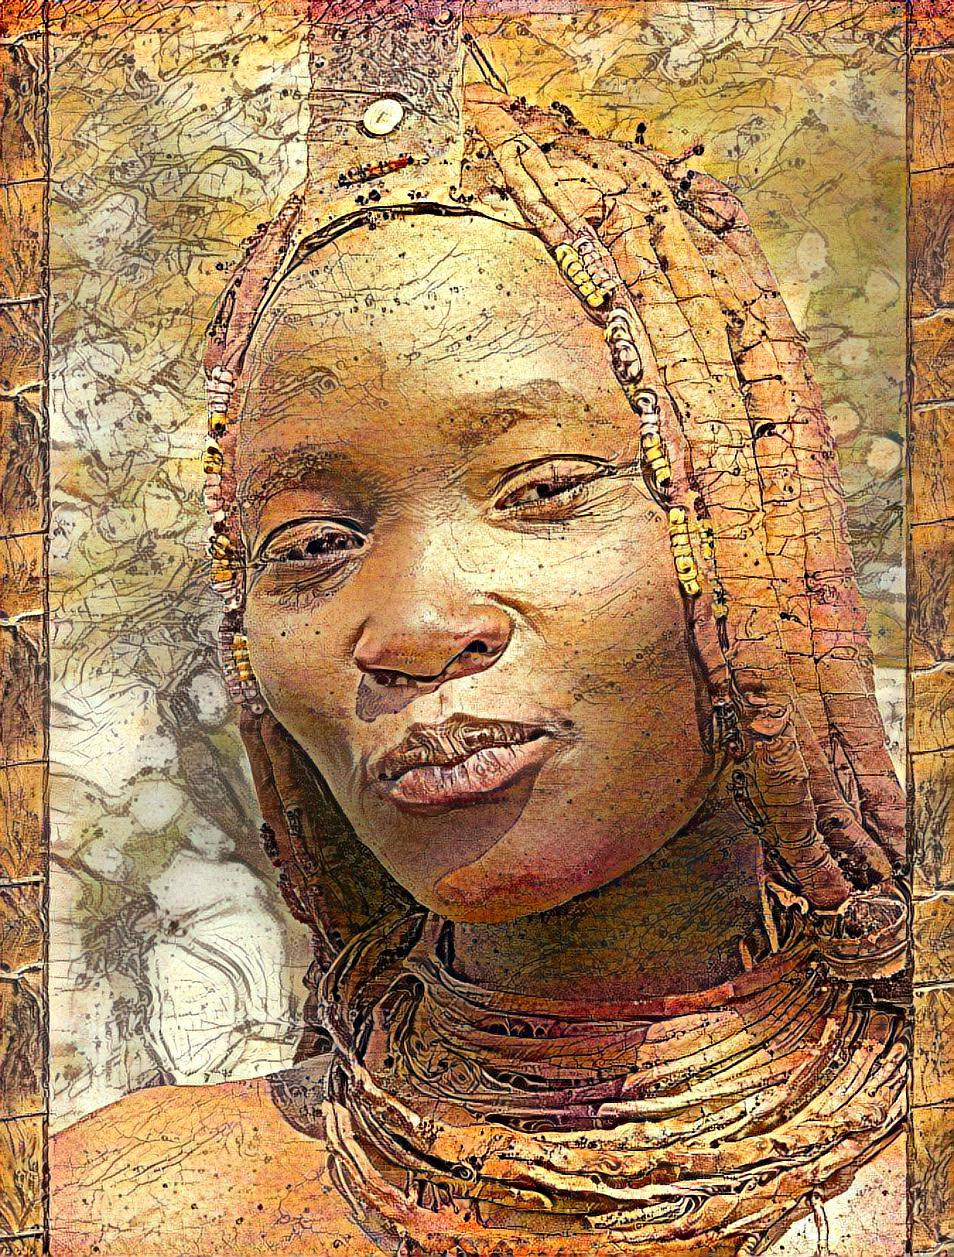 The Himba women of Namibia have a tradition of covering themselves with otjize paste, which is a cosmetic mixture of butterfat and ochre pigment.